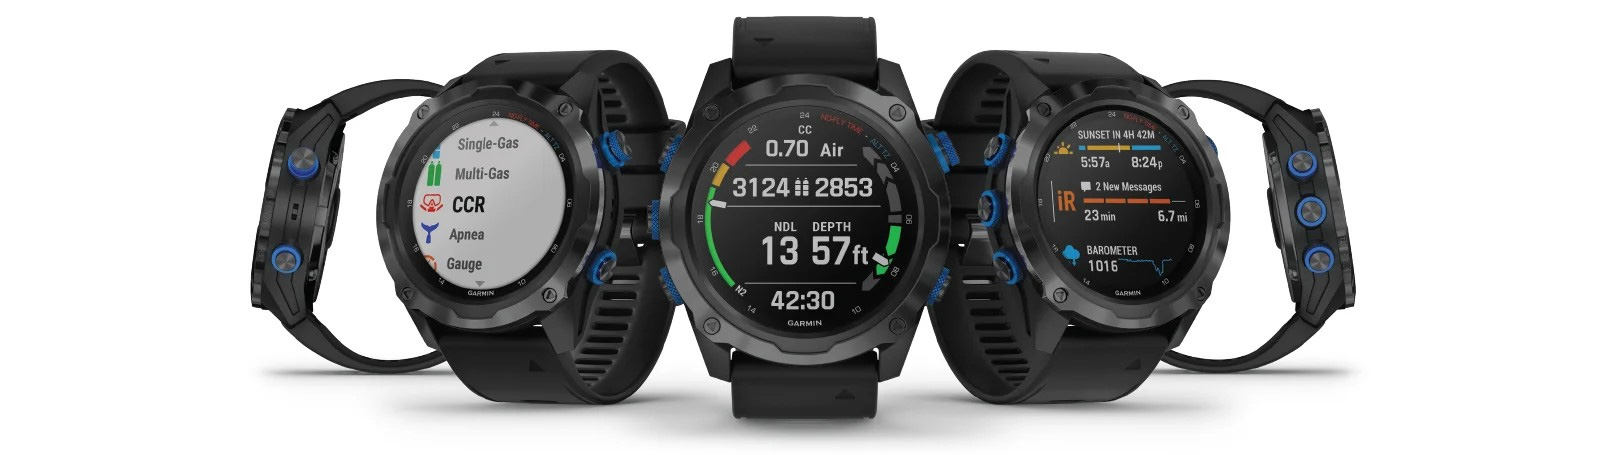 The Garmin MK2i - Dive into a Worl full of adventure